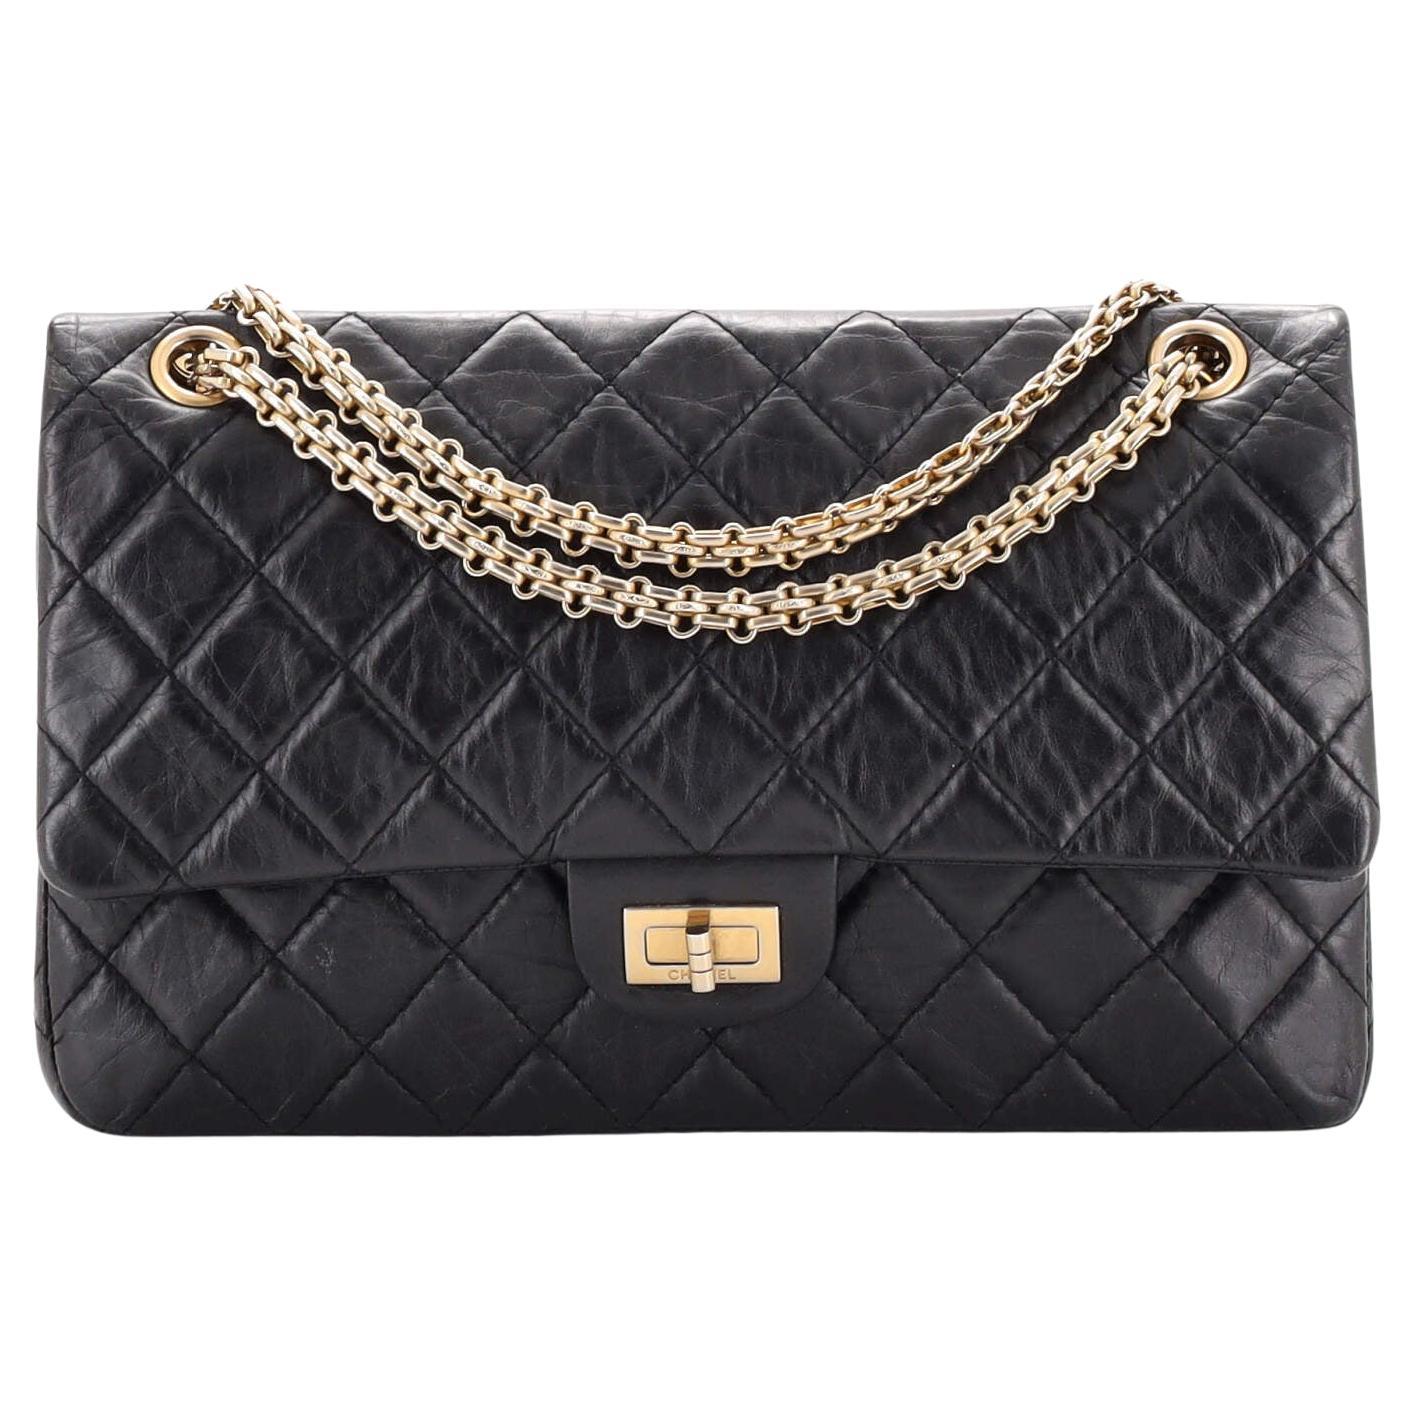 Chanel Beige Quilted Leather 2.55 Reissue Classic 226 Flap Bag (Circa 2008)